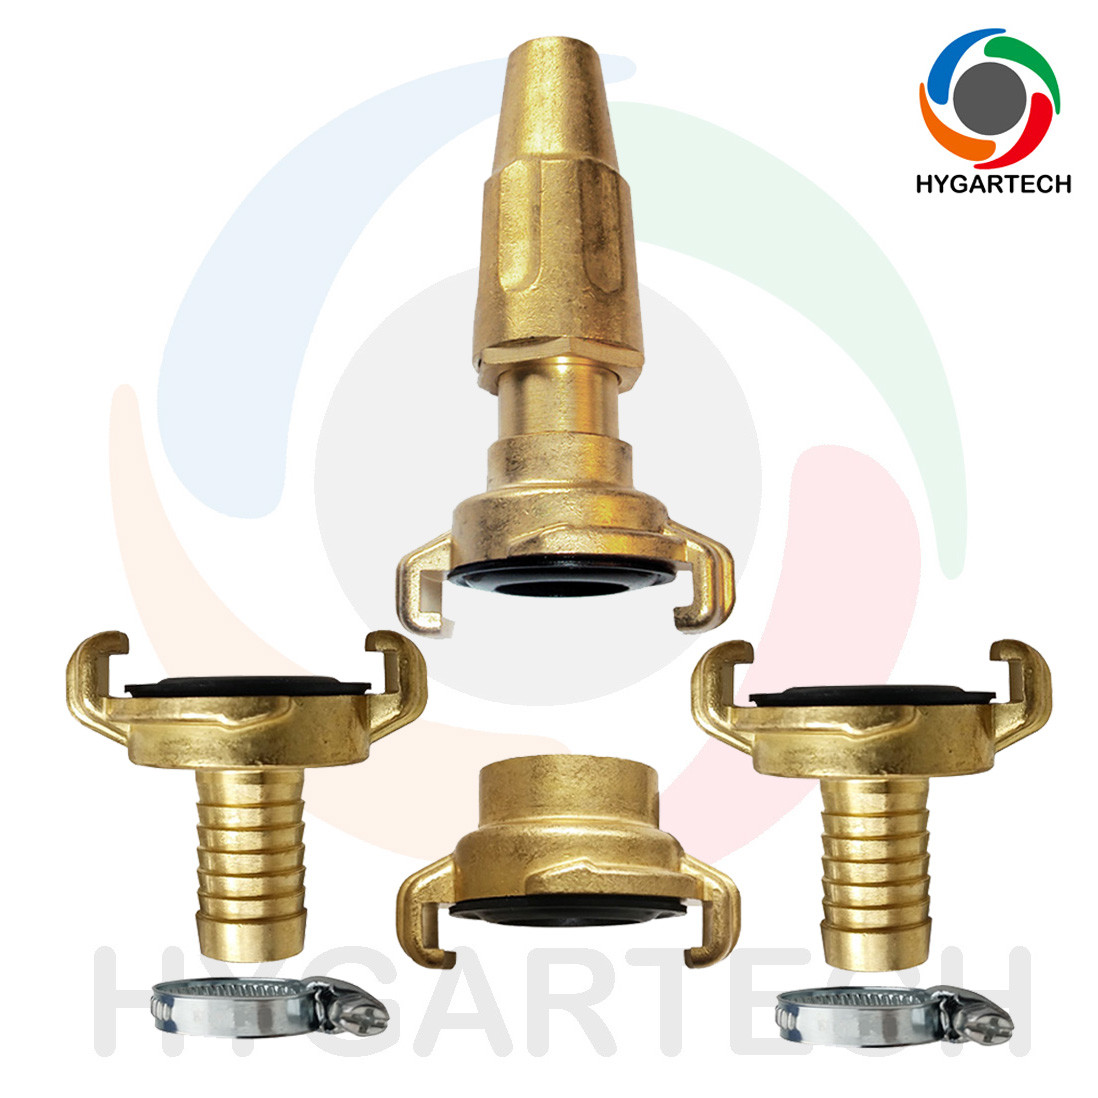  NBR Brass Hose Fittings Claw Lock Quick Connect Coupling & Spray Nozzle Set Manufactures